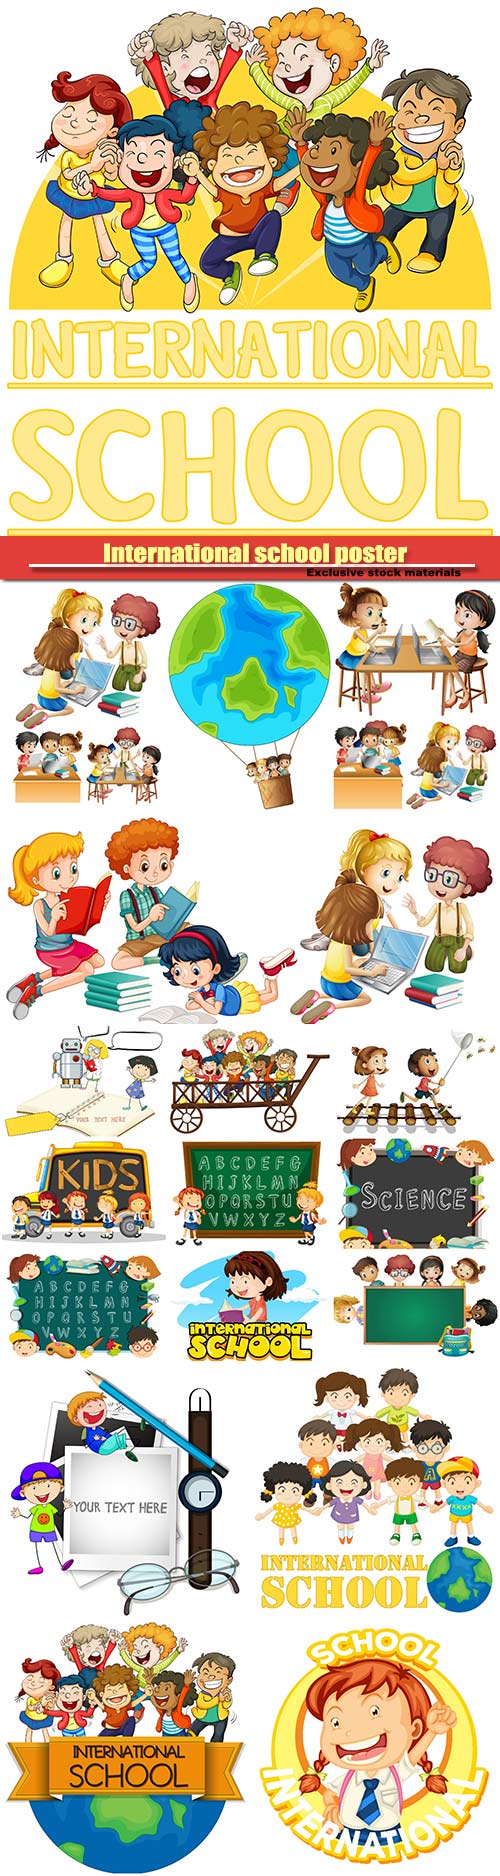 Frame template with boy and girl, international school poster with many children